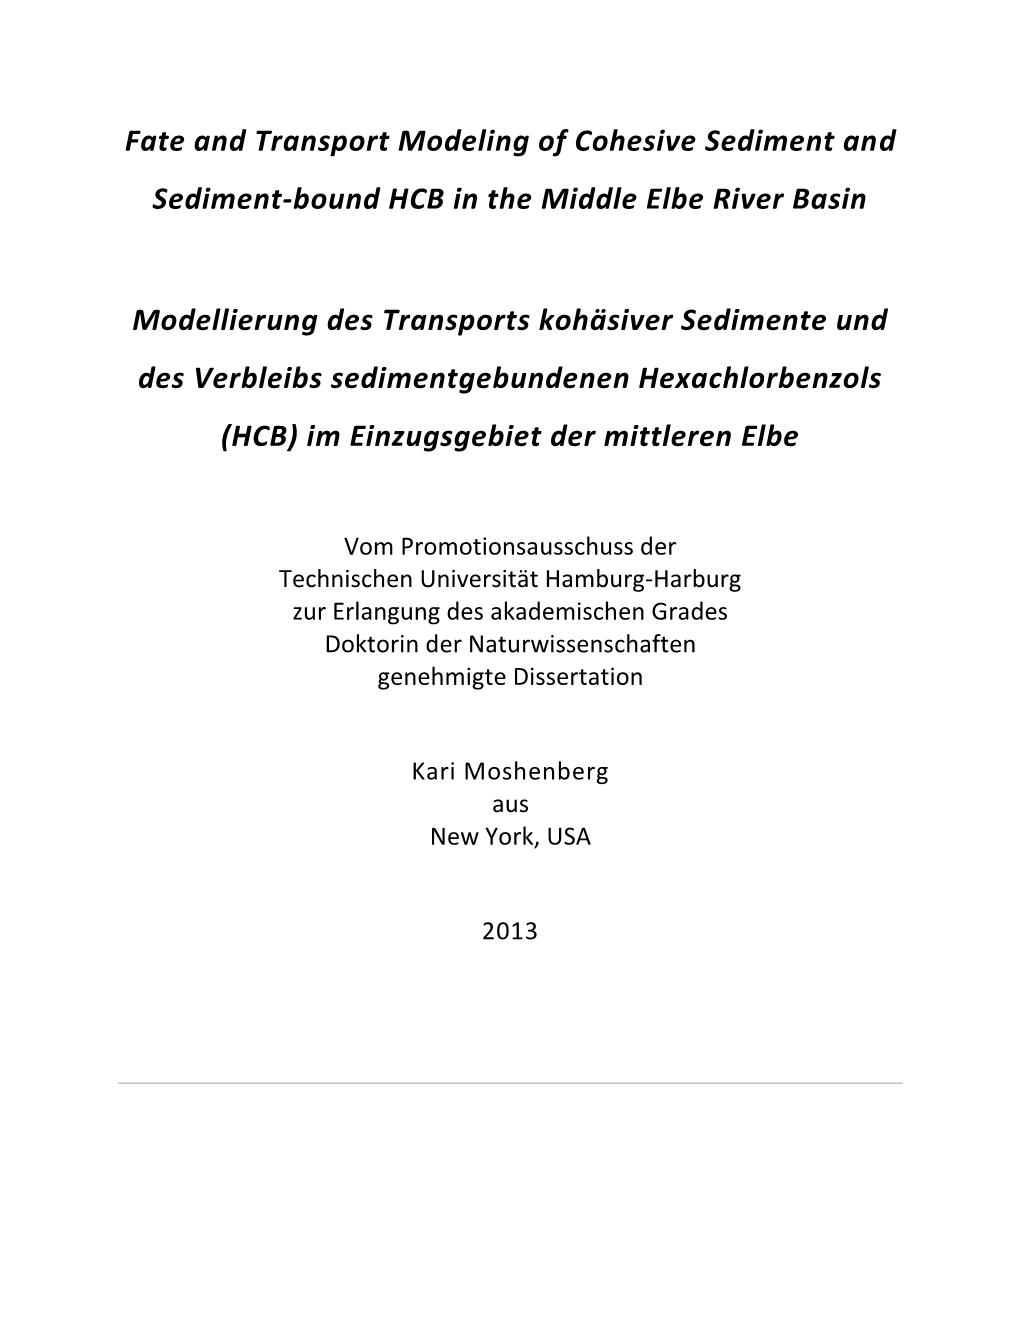 Fate and Transport Modeling of Cohesive Sediment and Sediment-Bound HCB in the Middle Elbe River Basin